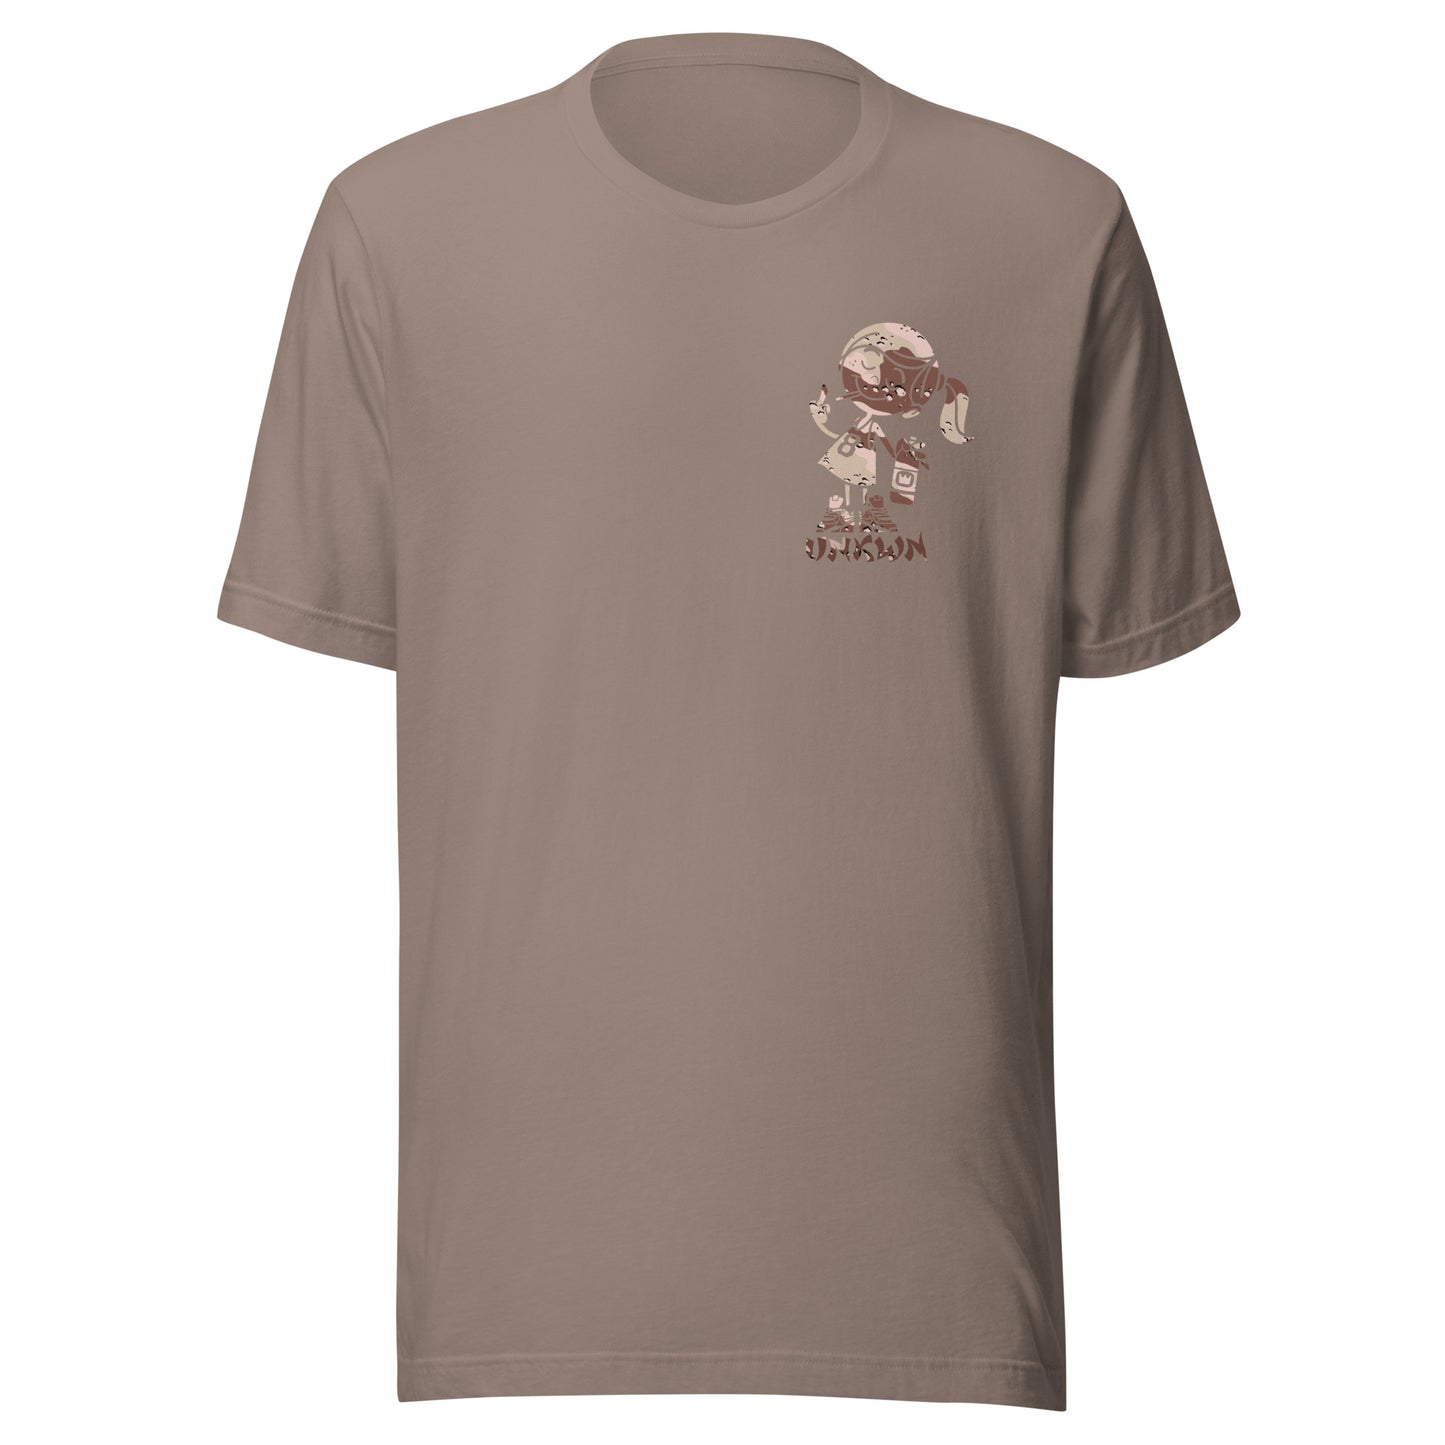 Wild'n out T-shirt - chocolate chip